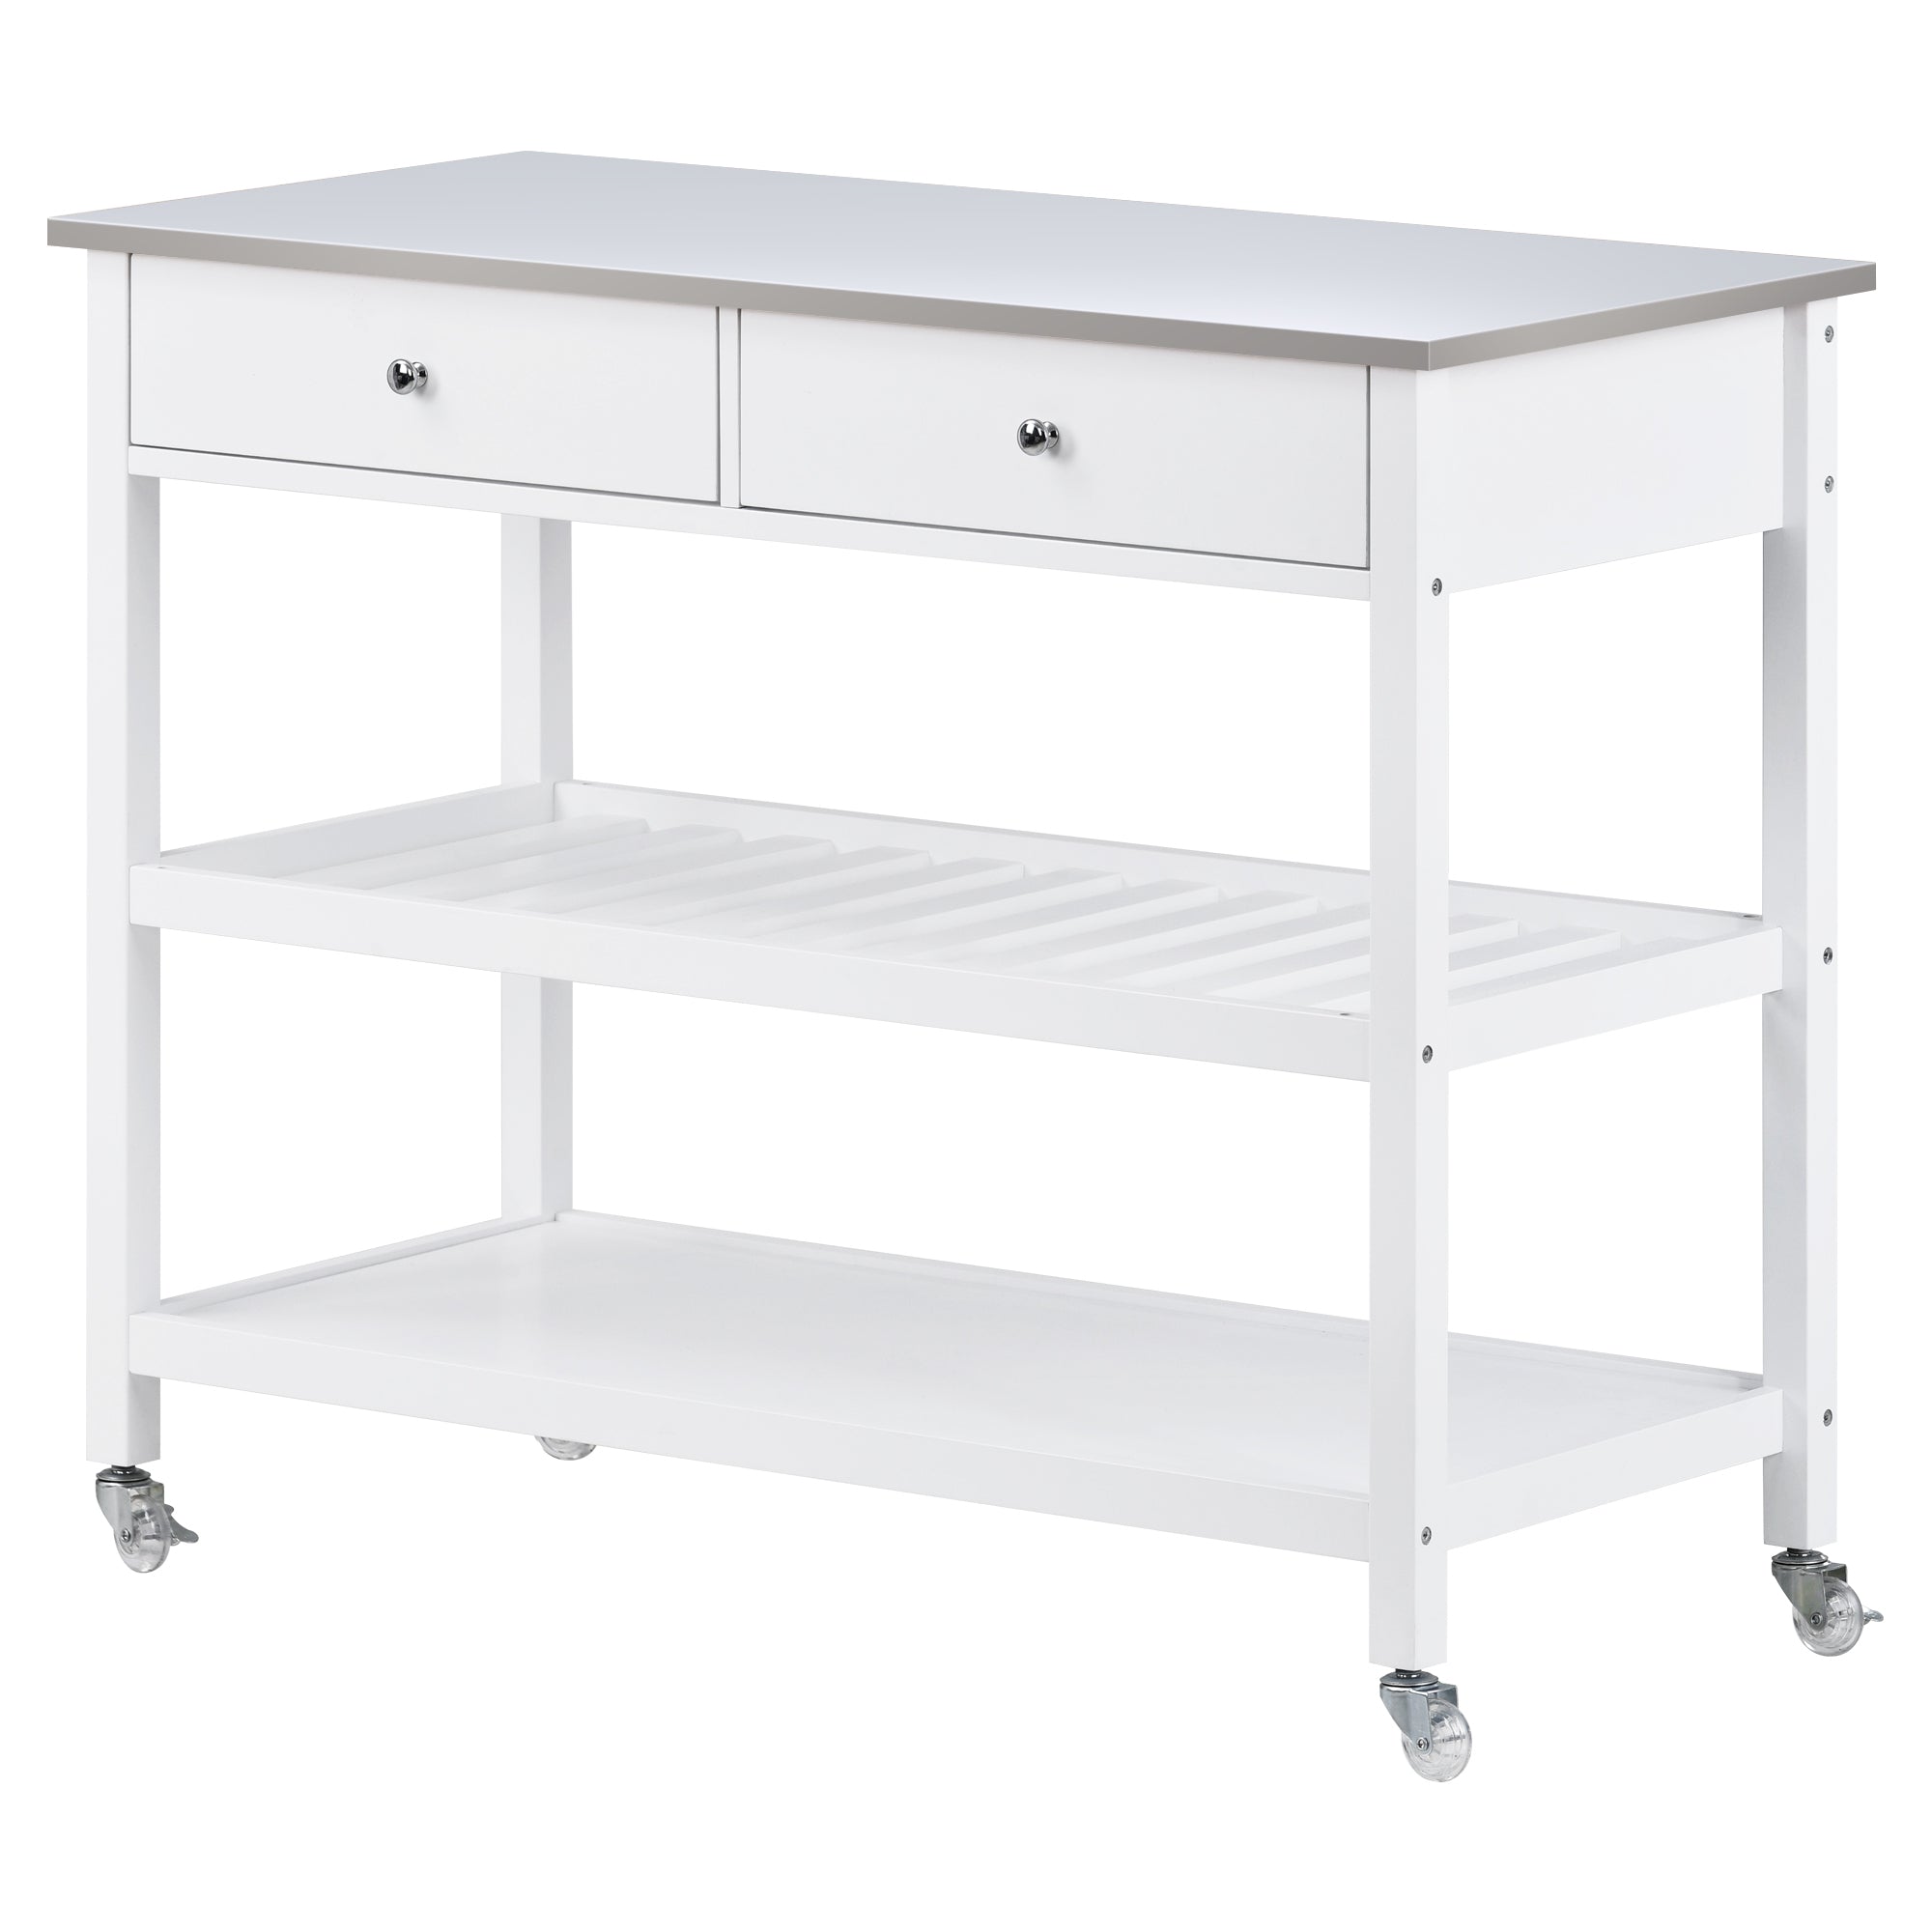 Rolling Kitchen Cart with Stainless Steel Top and Locking Wheels 43.3" Wide Bamboo Wood Frame (White)